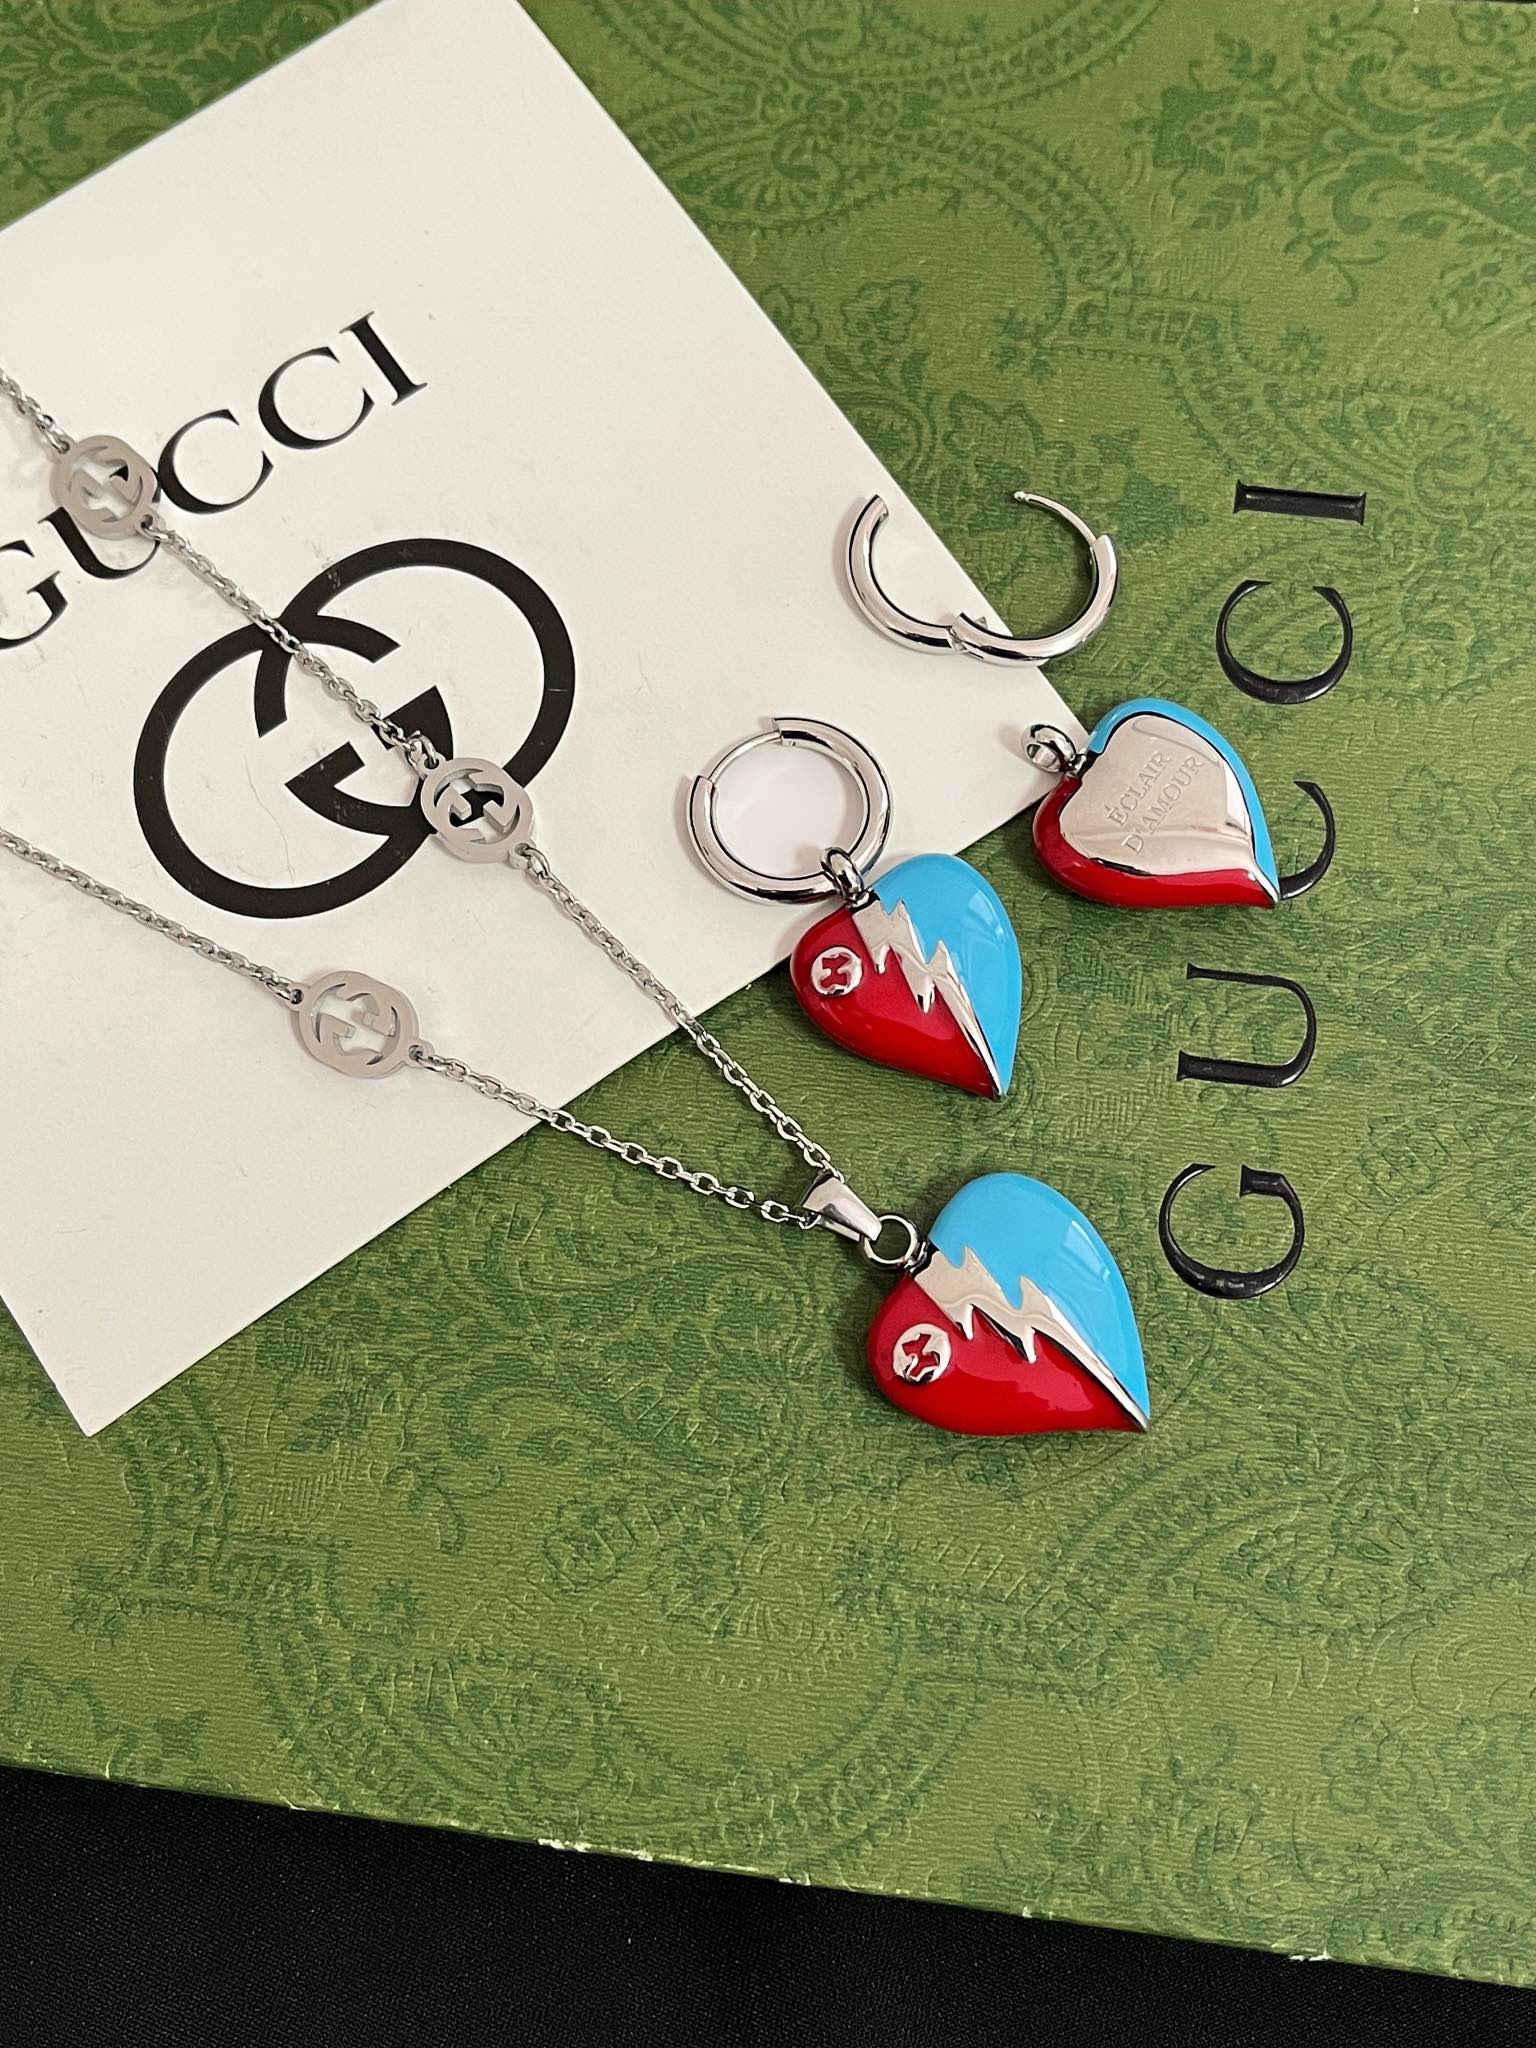 X583 Gucci earrings/necklace